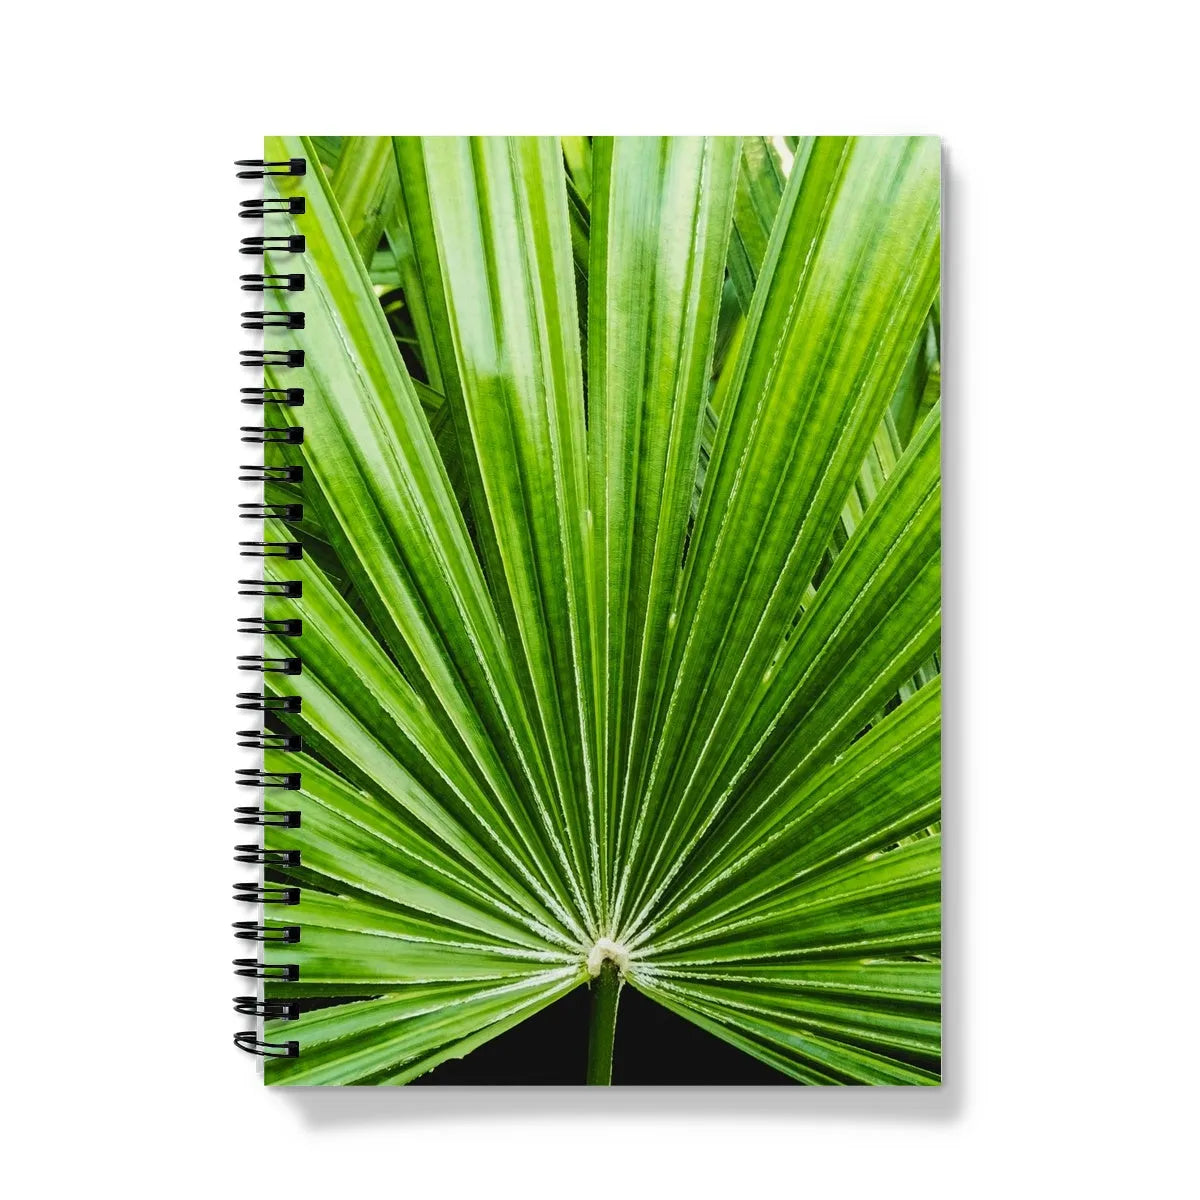 Peacocky Notebook - A5 - Graph Paper - Notebooks & Notepads - Aesthetic Art